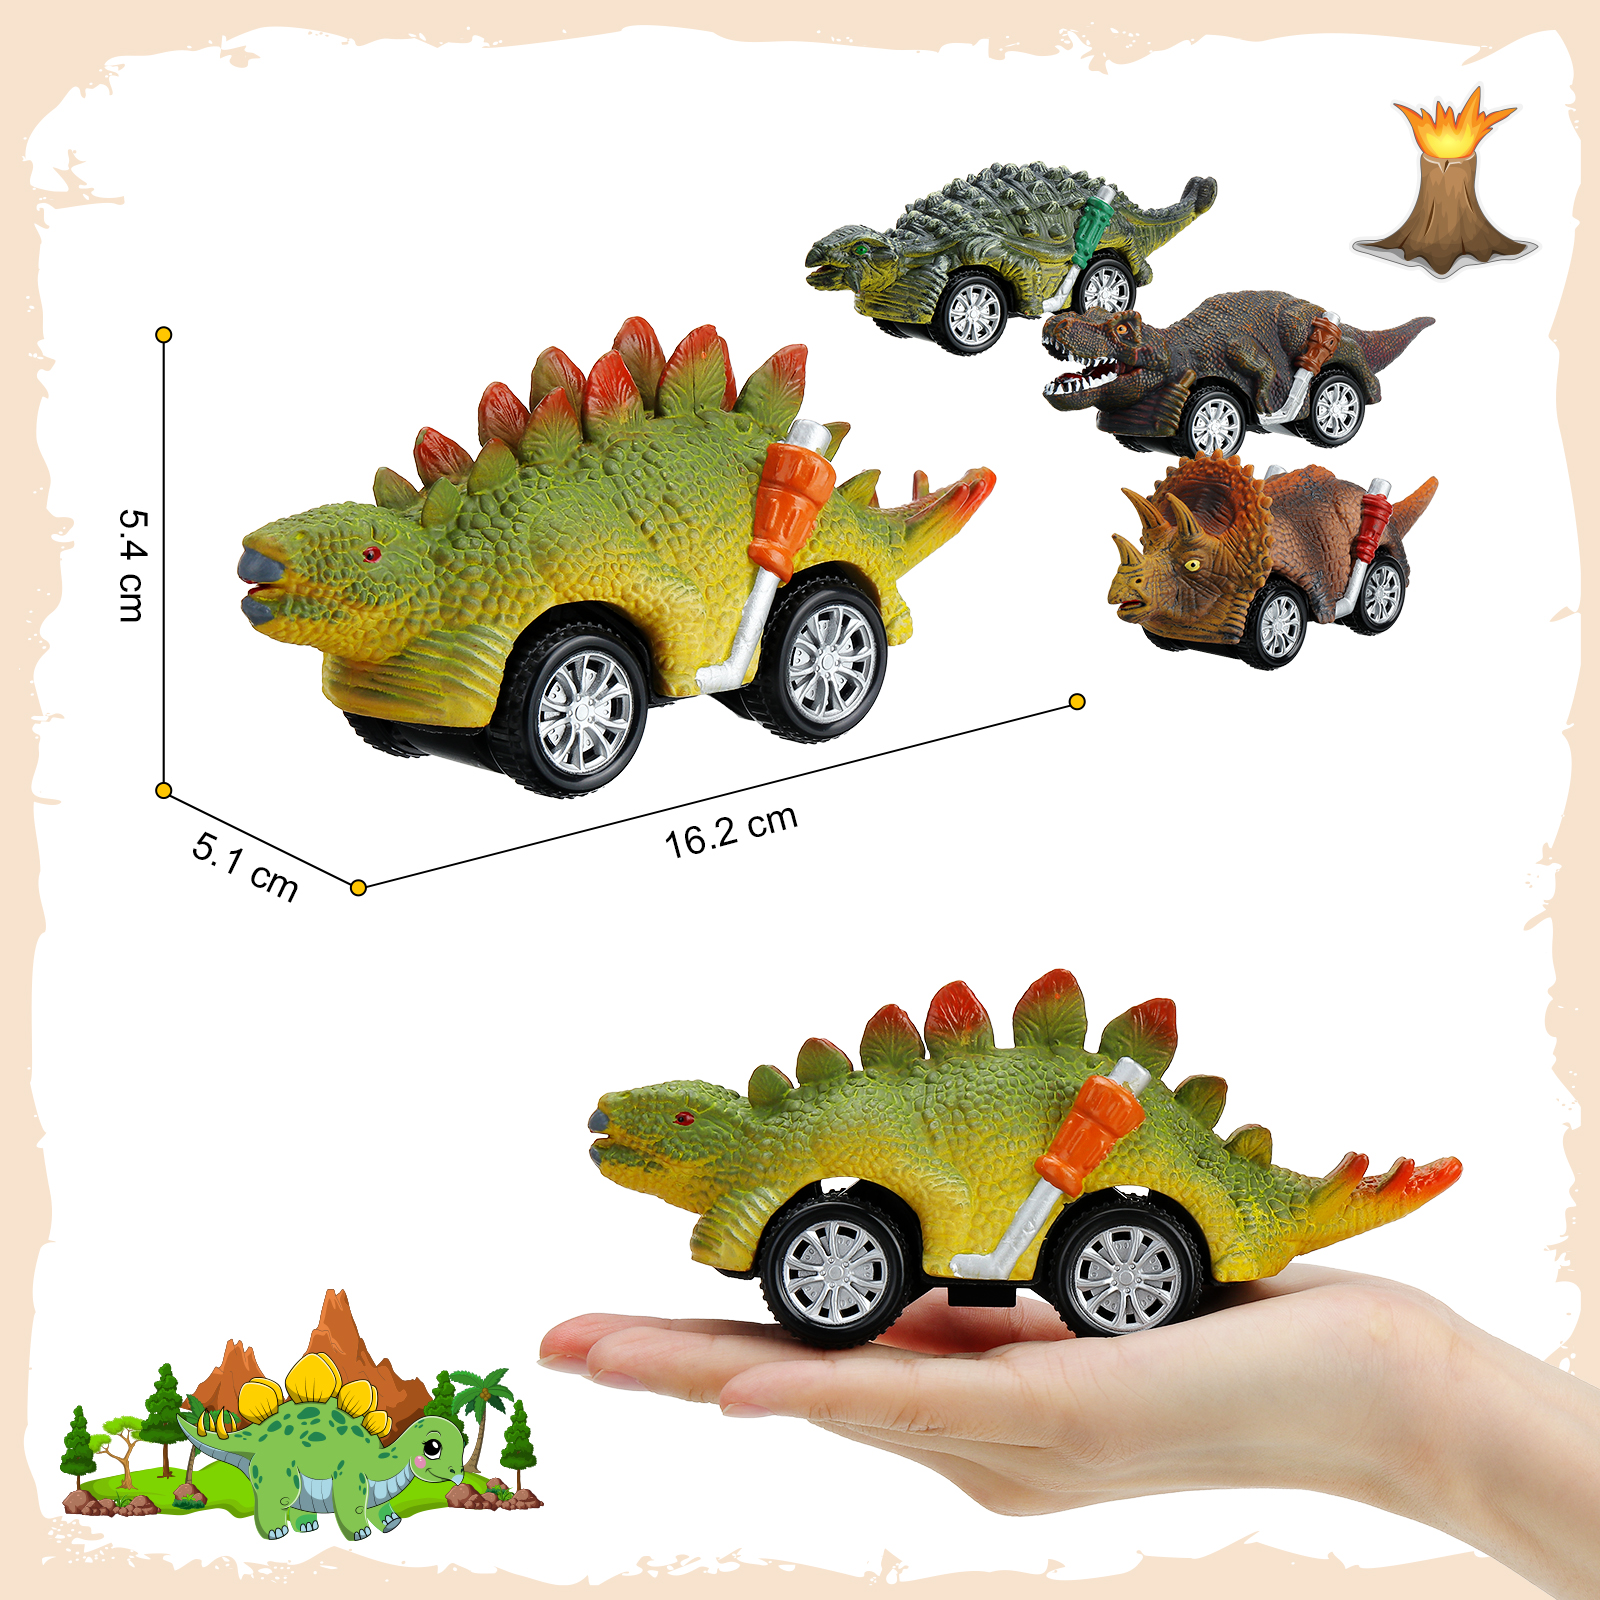 Pickwoo-Dinosaur-Toys-Cars-Inertia-Vehicles-Toddlers-Kids-Dinosaur-Party-Games-with-T-Rex-Dino-Toys--1895631-17